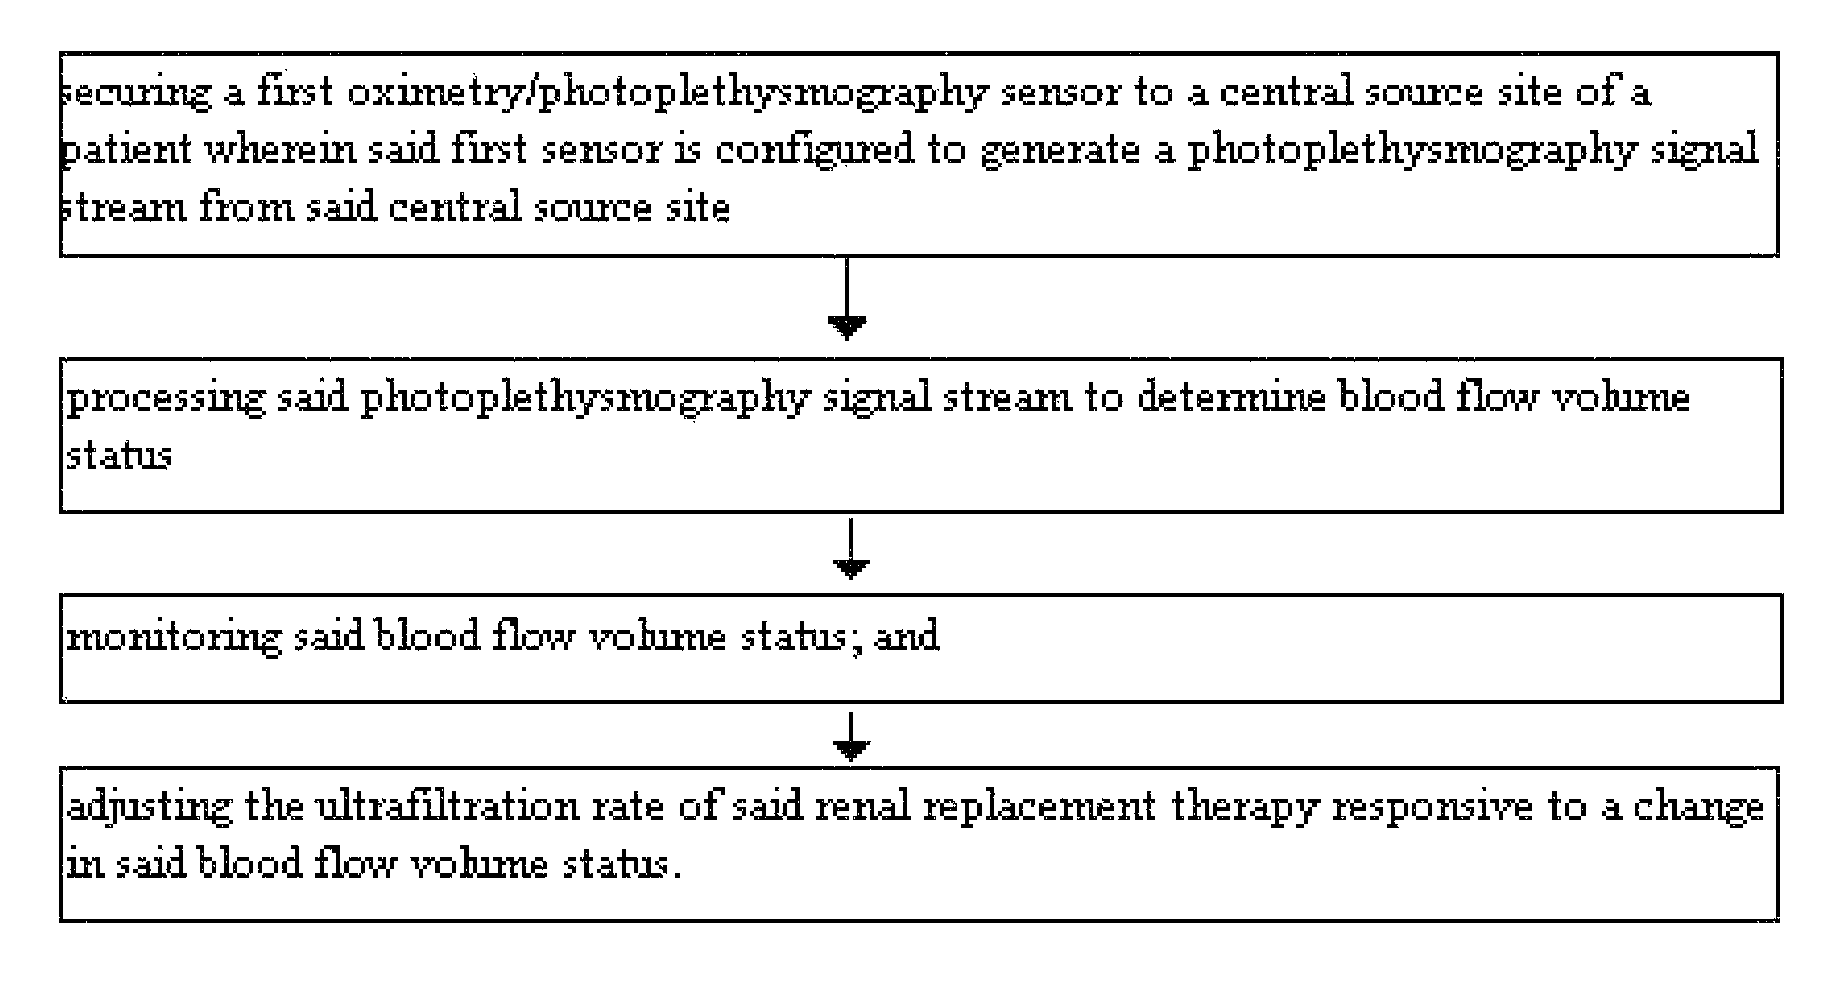 Method for using photoplethysmography to optimize fluid removal during renal replacement therapy by hemodialysis or hemofiltration